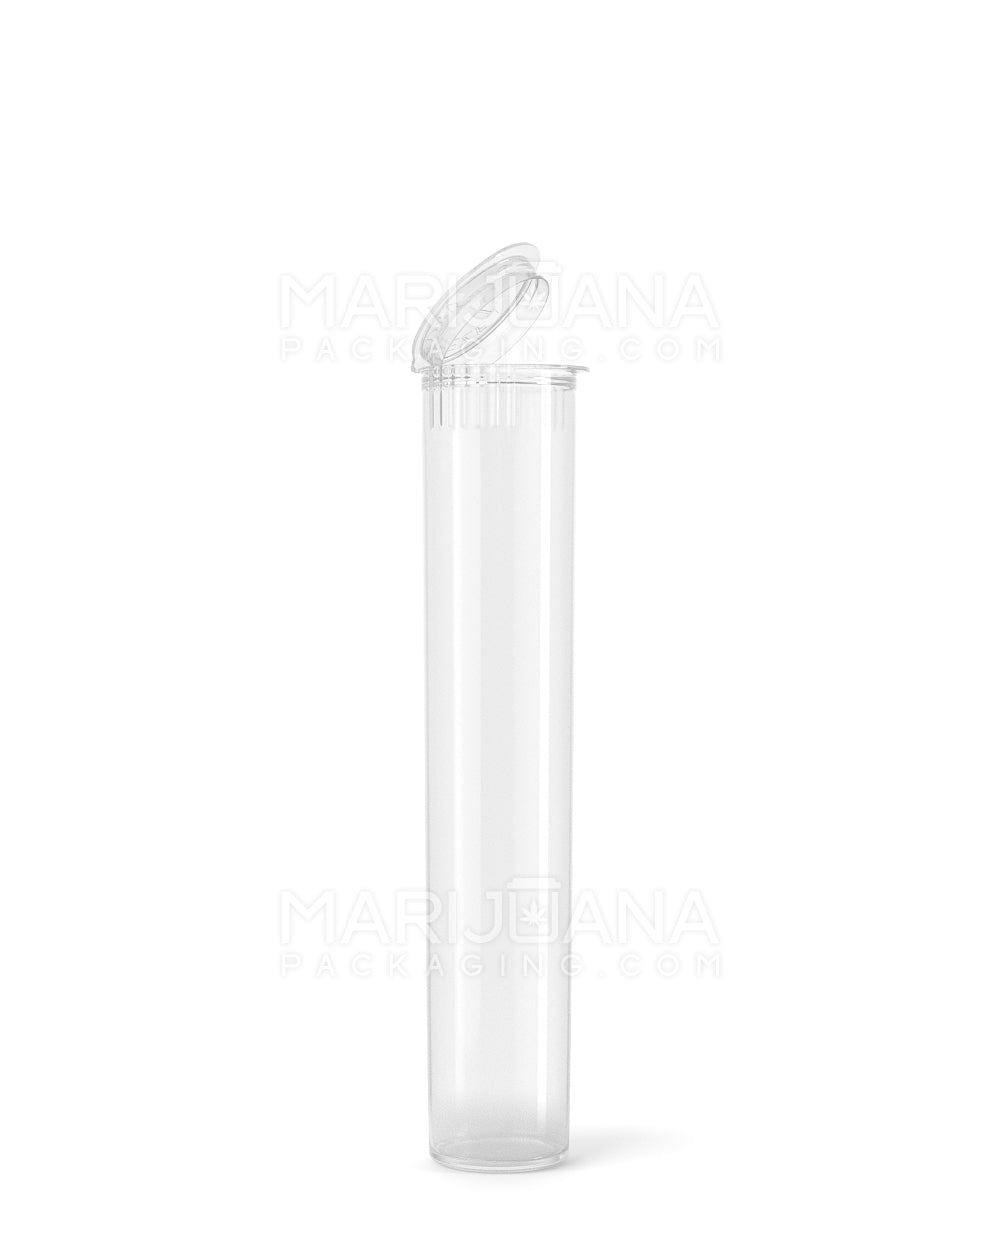 Child Resistant | Pop Top Plastic Pre-Roll Tubes (Open) | 95mm - Clear - 1000 Count - 1